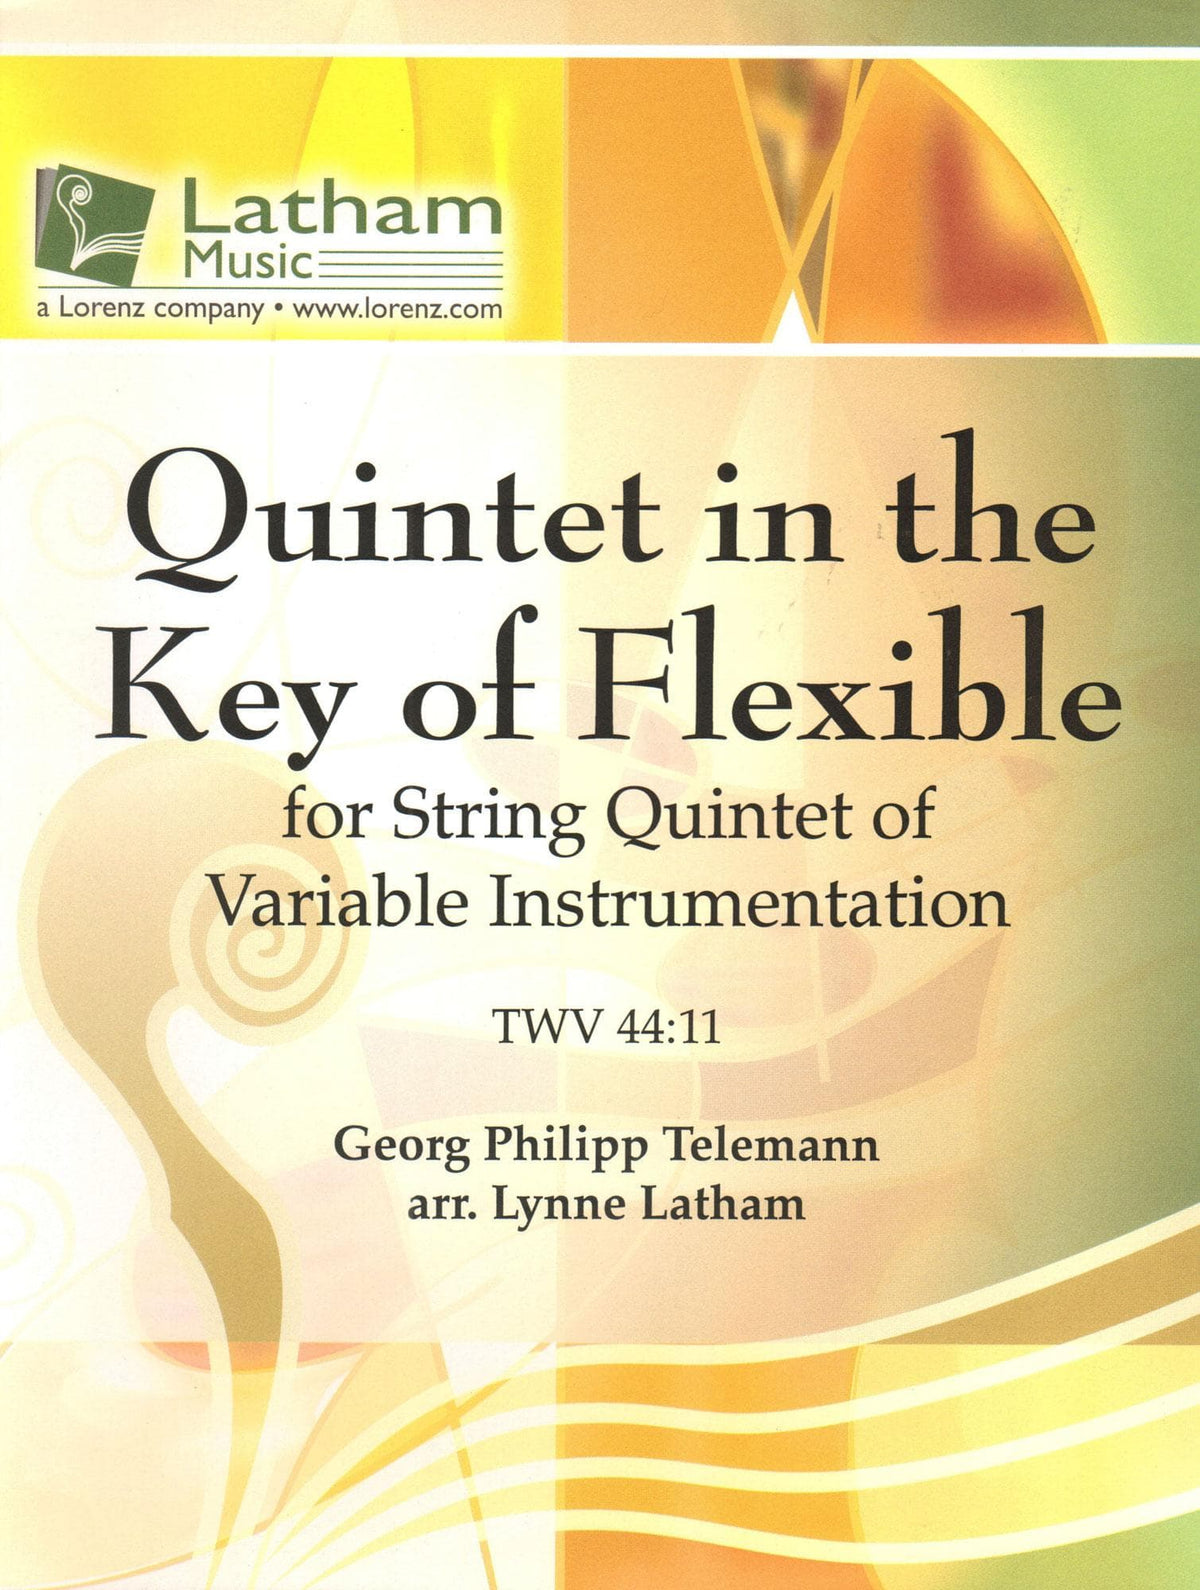 Quintet in the Key of Flexible - Work by G.P. Telemann - Arranged for Flexible String Quintet by Lynne Latham